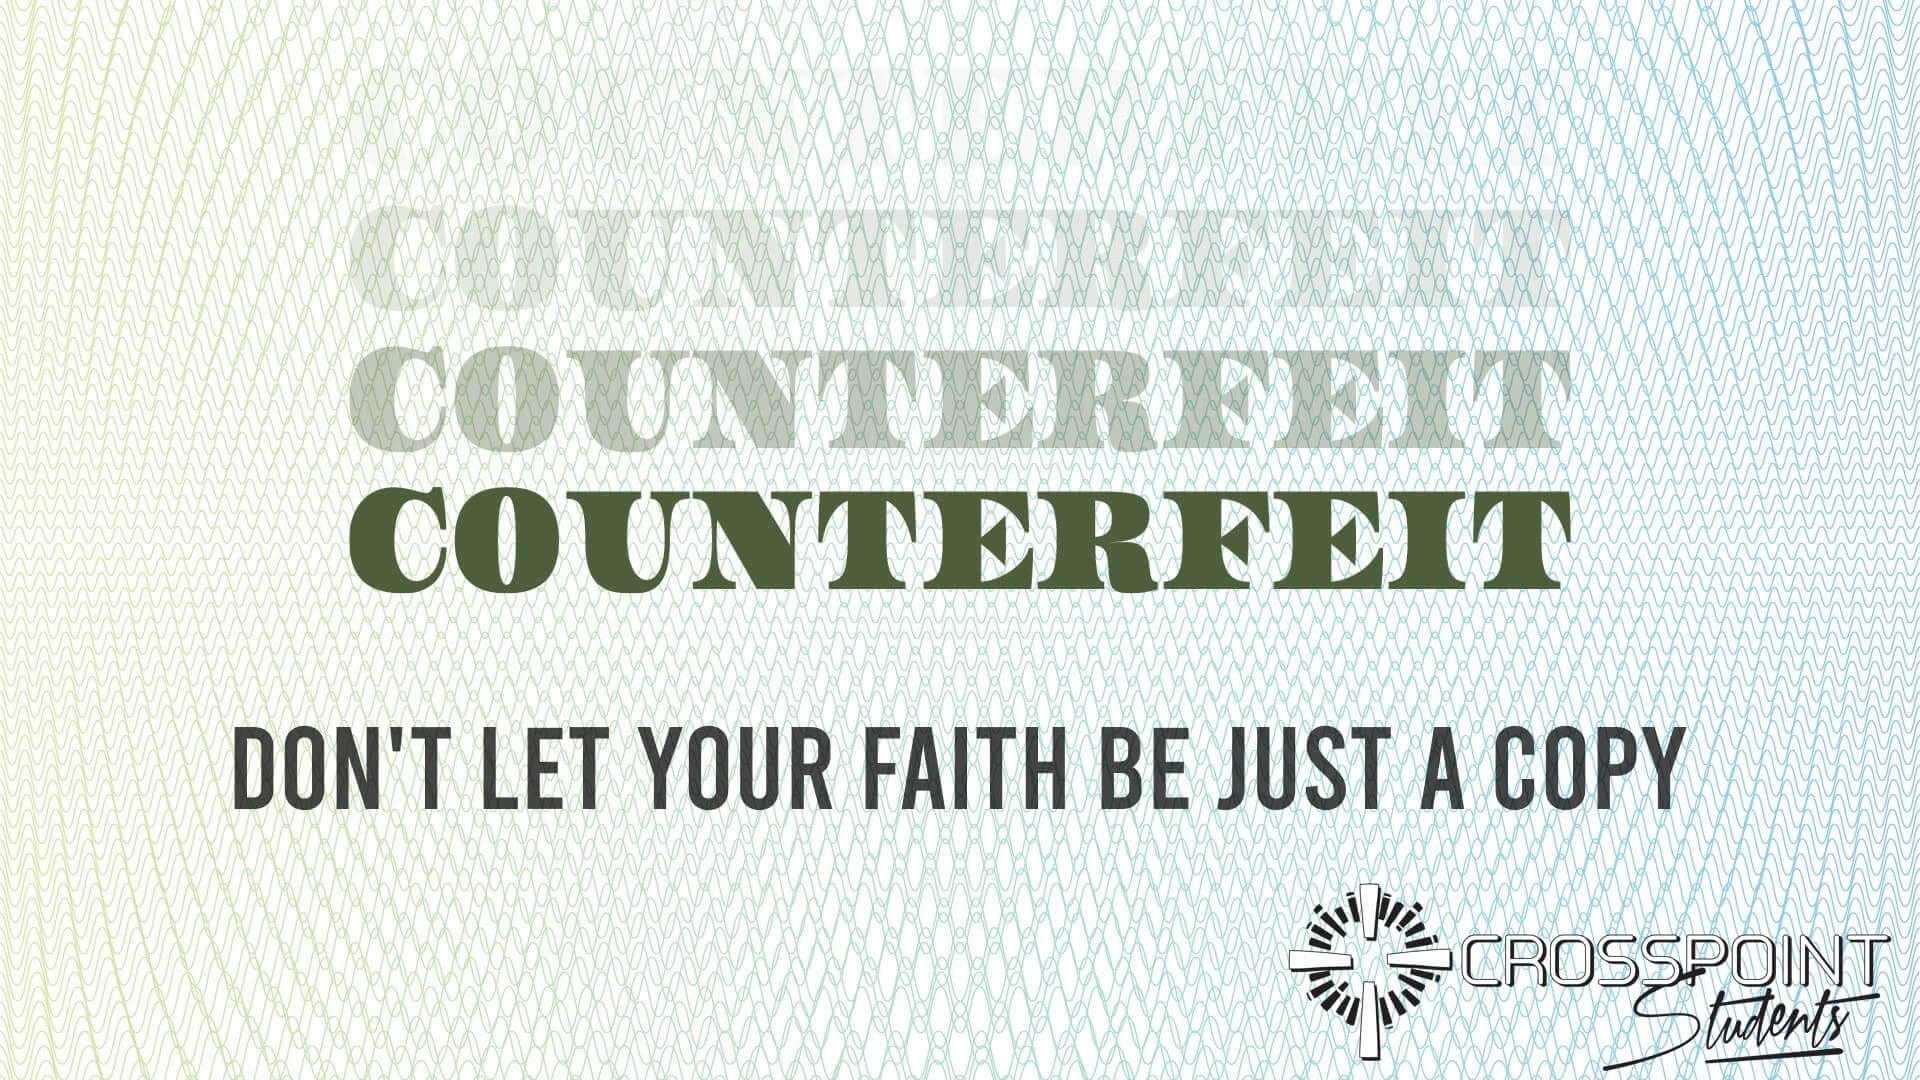 Counterfeit: Don't Let Your Faith Be Just a Copy